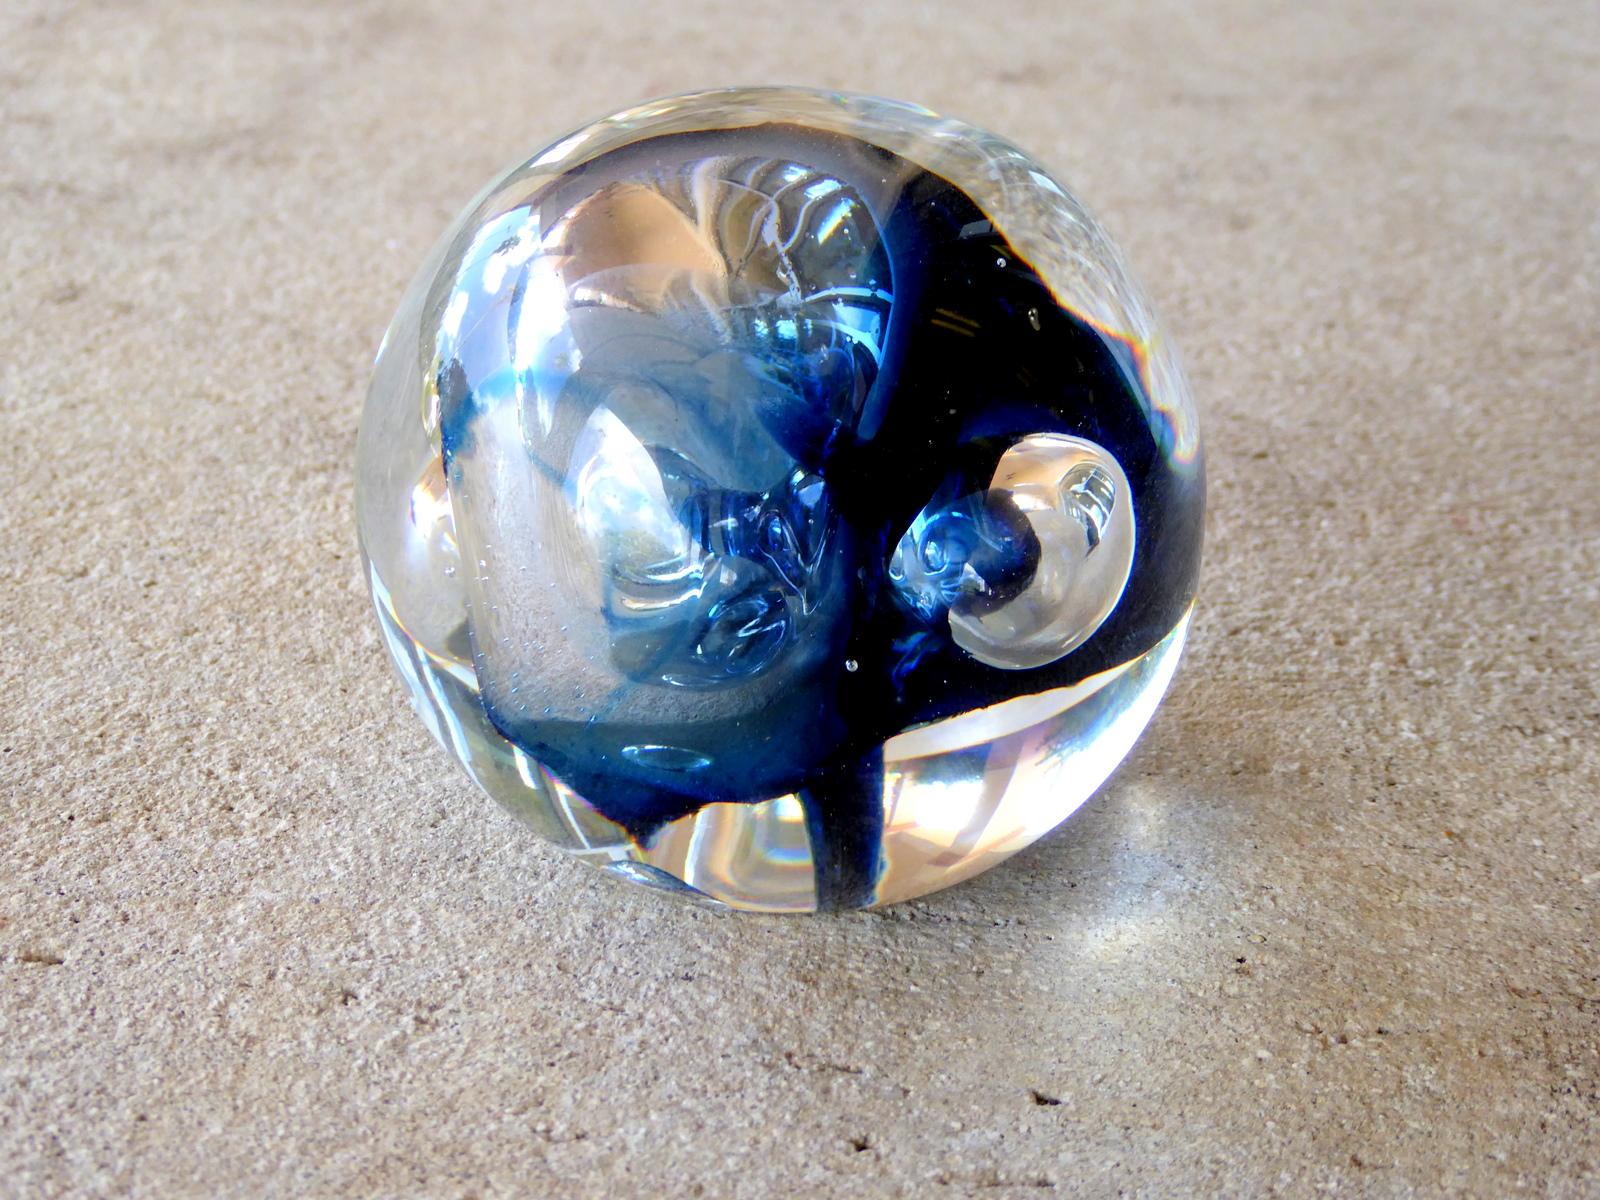 Marvelous cobalt blue and clear art glass paperweight by Rollin Karg. Signed. If the date on the sticker is accurate, it is one of his earliest known works.

A few important notes about all items available through this 1stdibs dealer:

1. We list